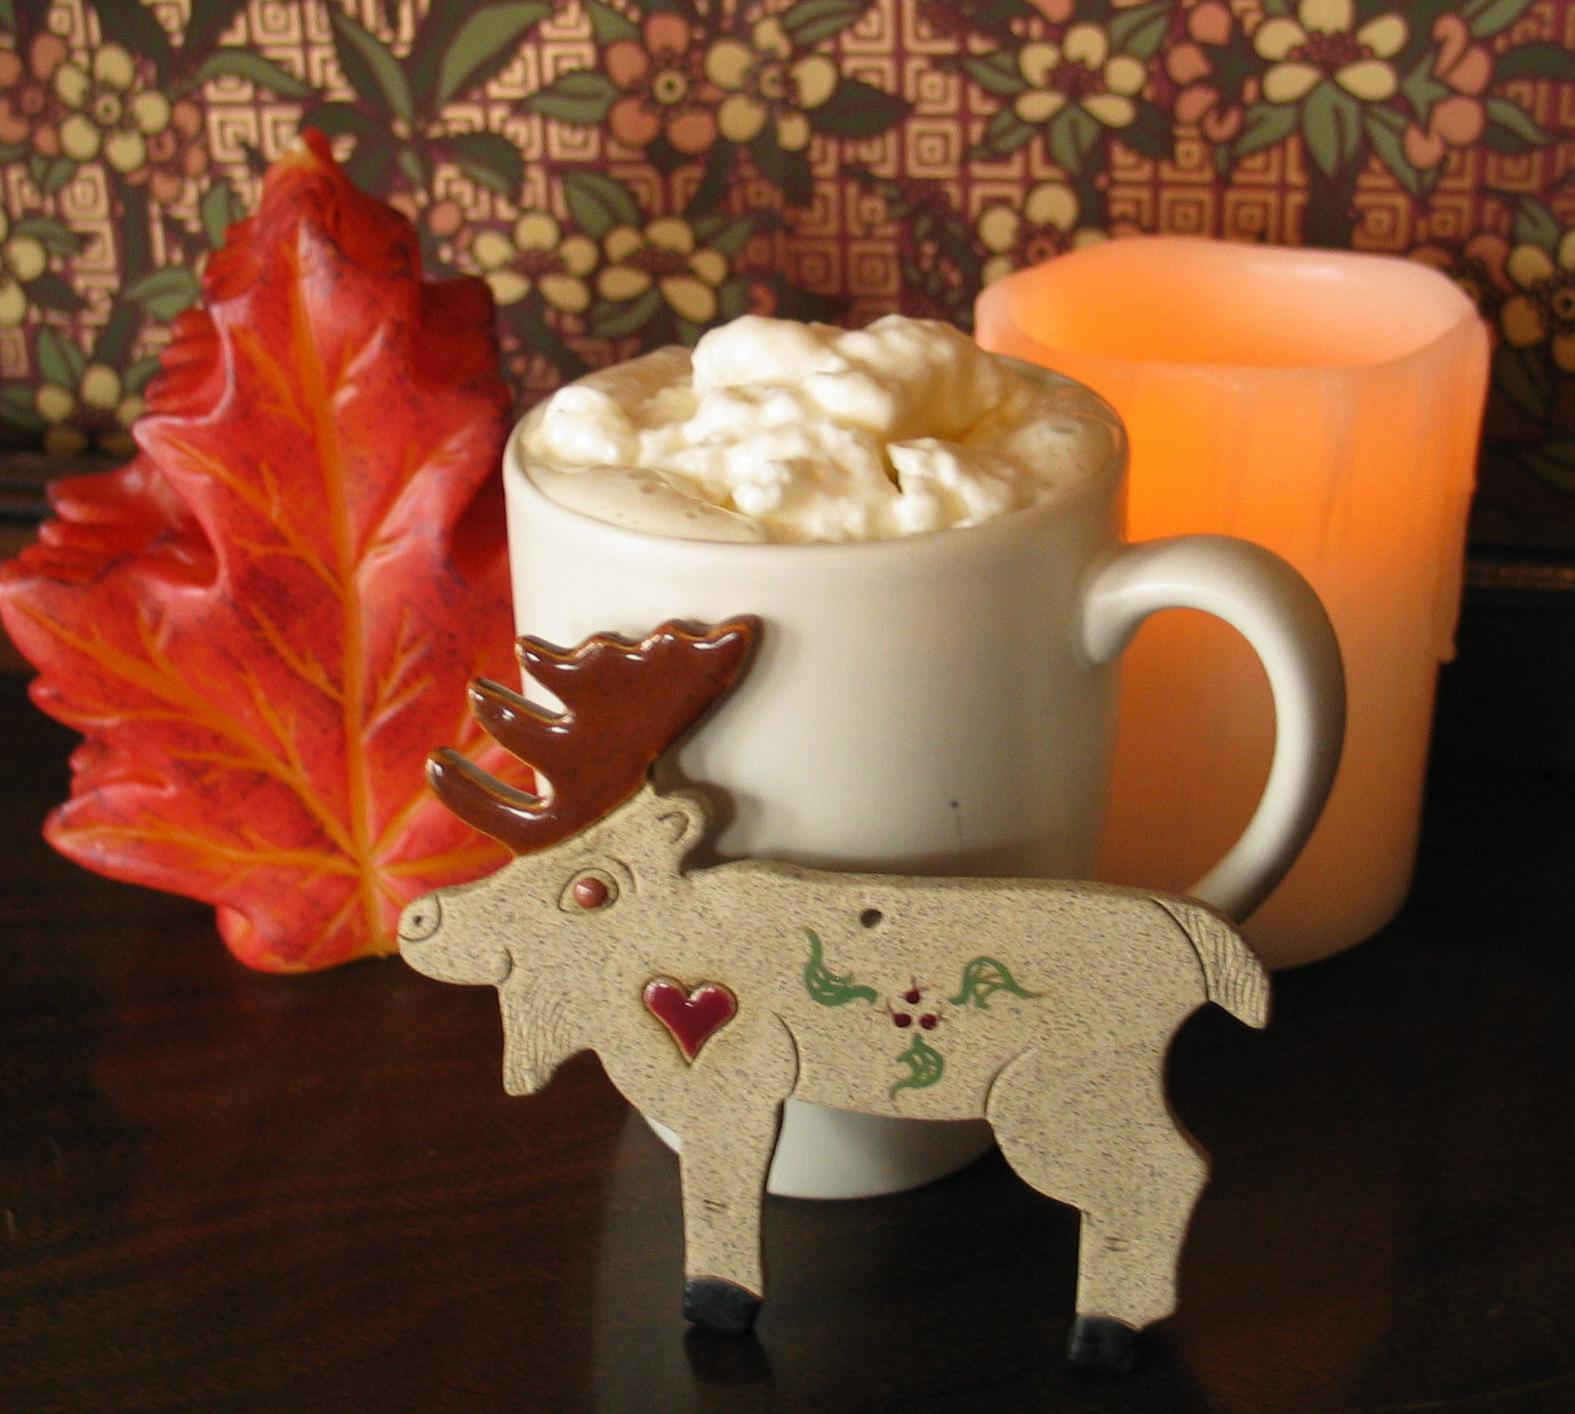  Cozy up with a warm cup of Canadian coffee on a chilly day.